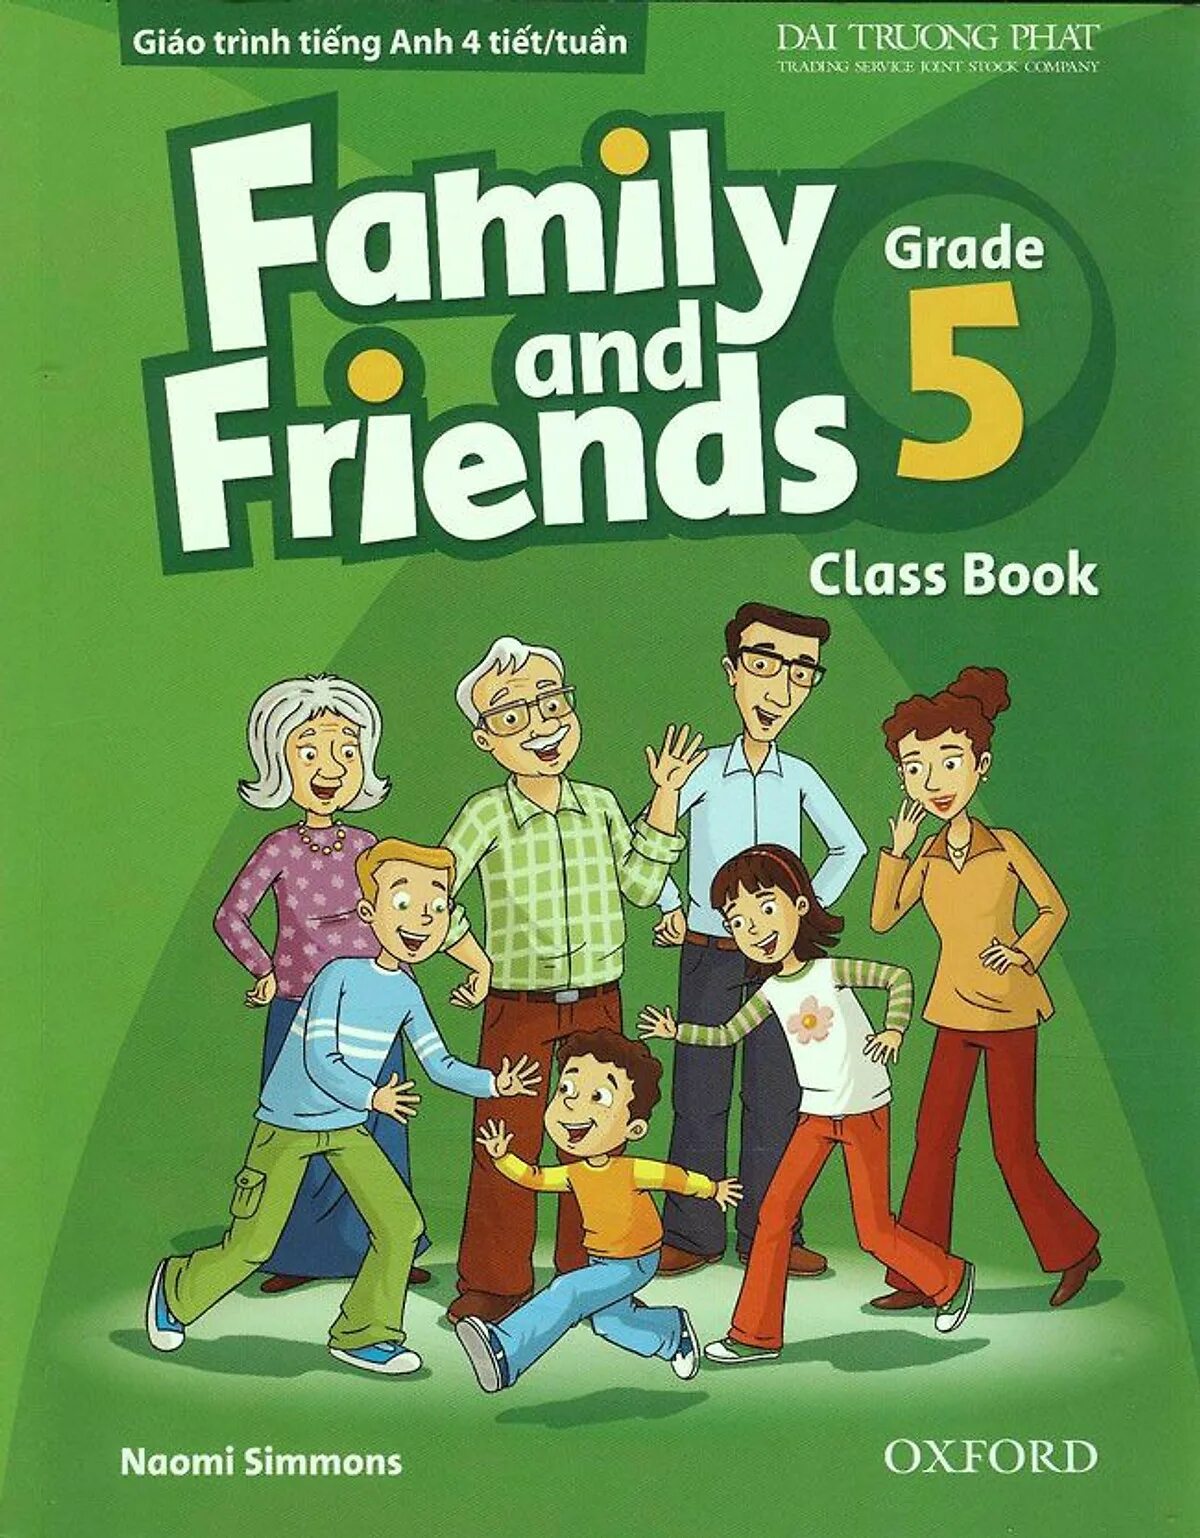 Family and friends students. Учебник Family and friends 5. Family English учебник. Фэмили френдс 5. Английский Family and friends.